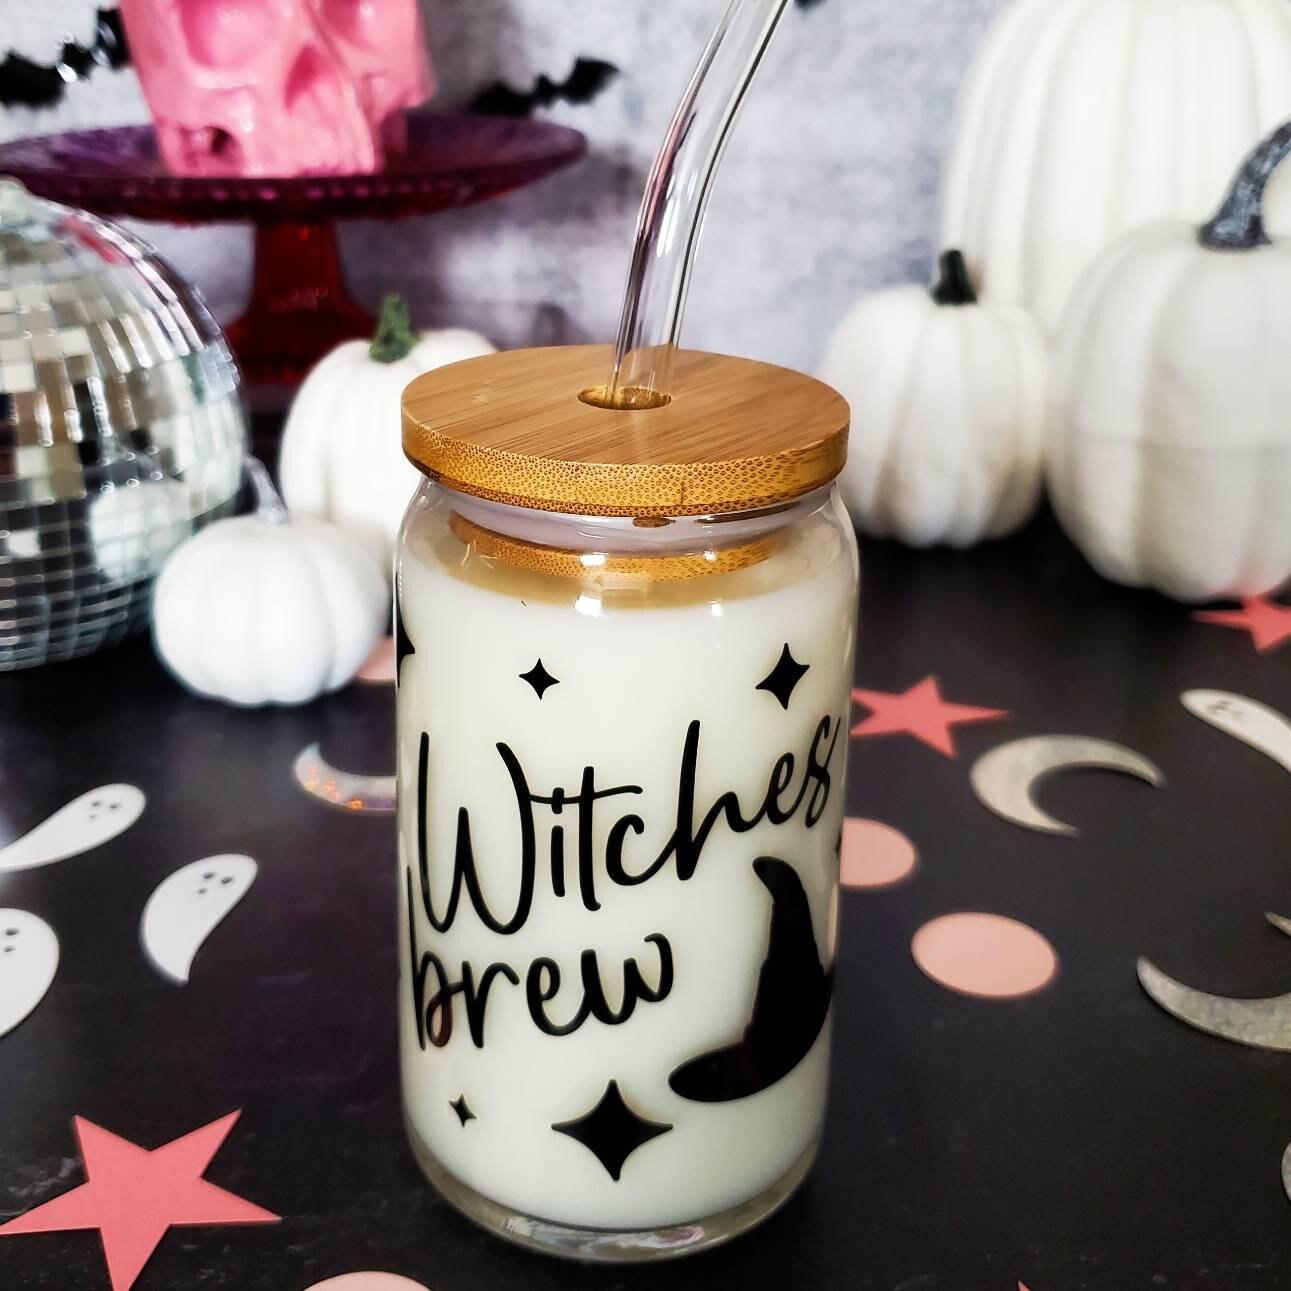 Bad Witch Iced Coffee Cup Salt and Sparkle